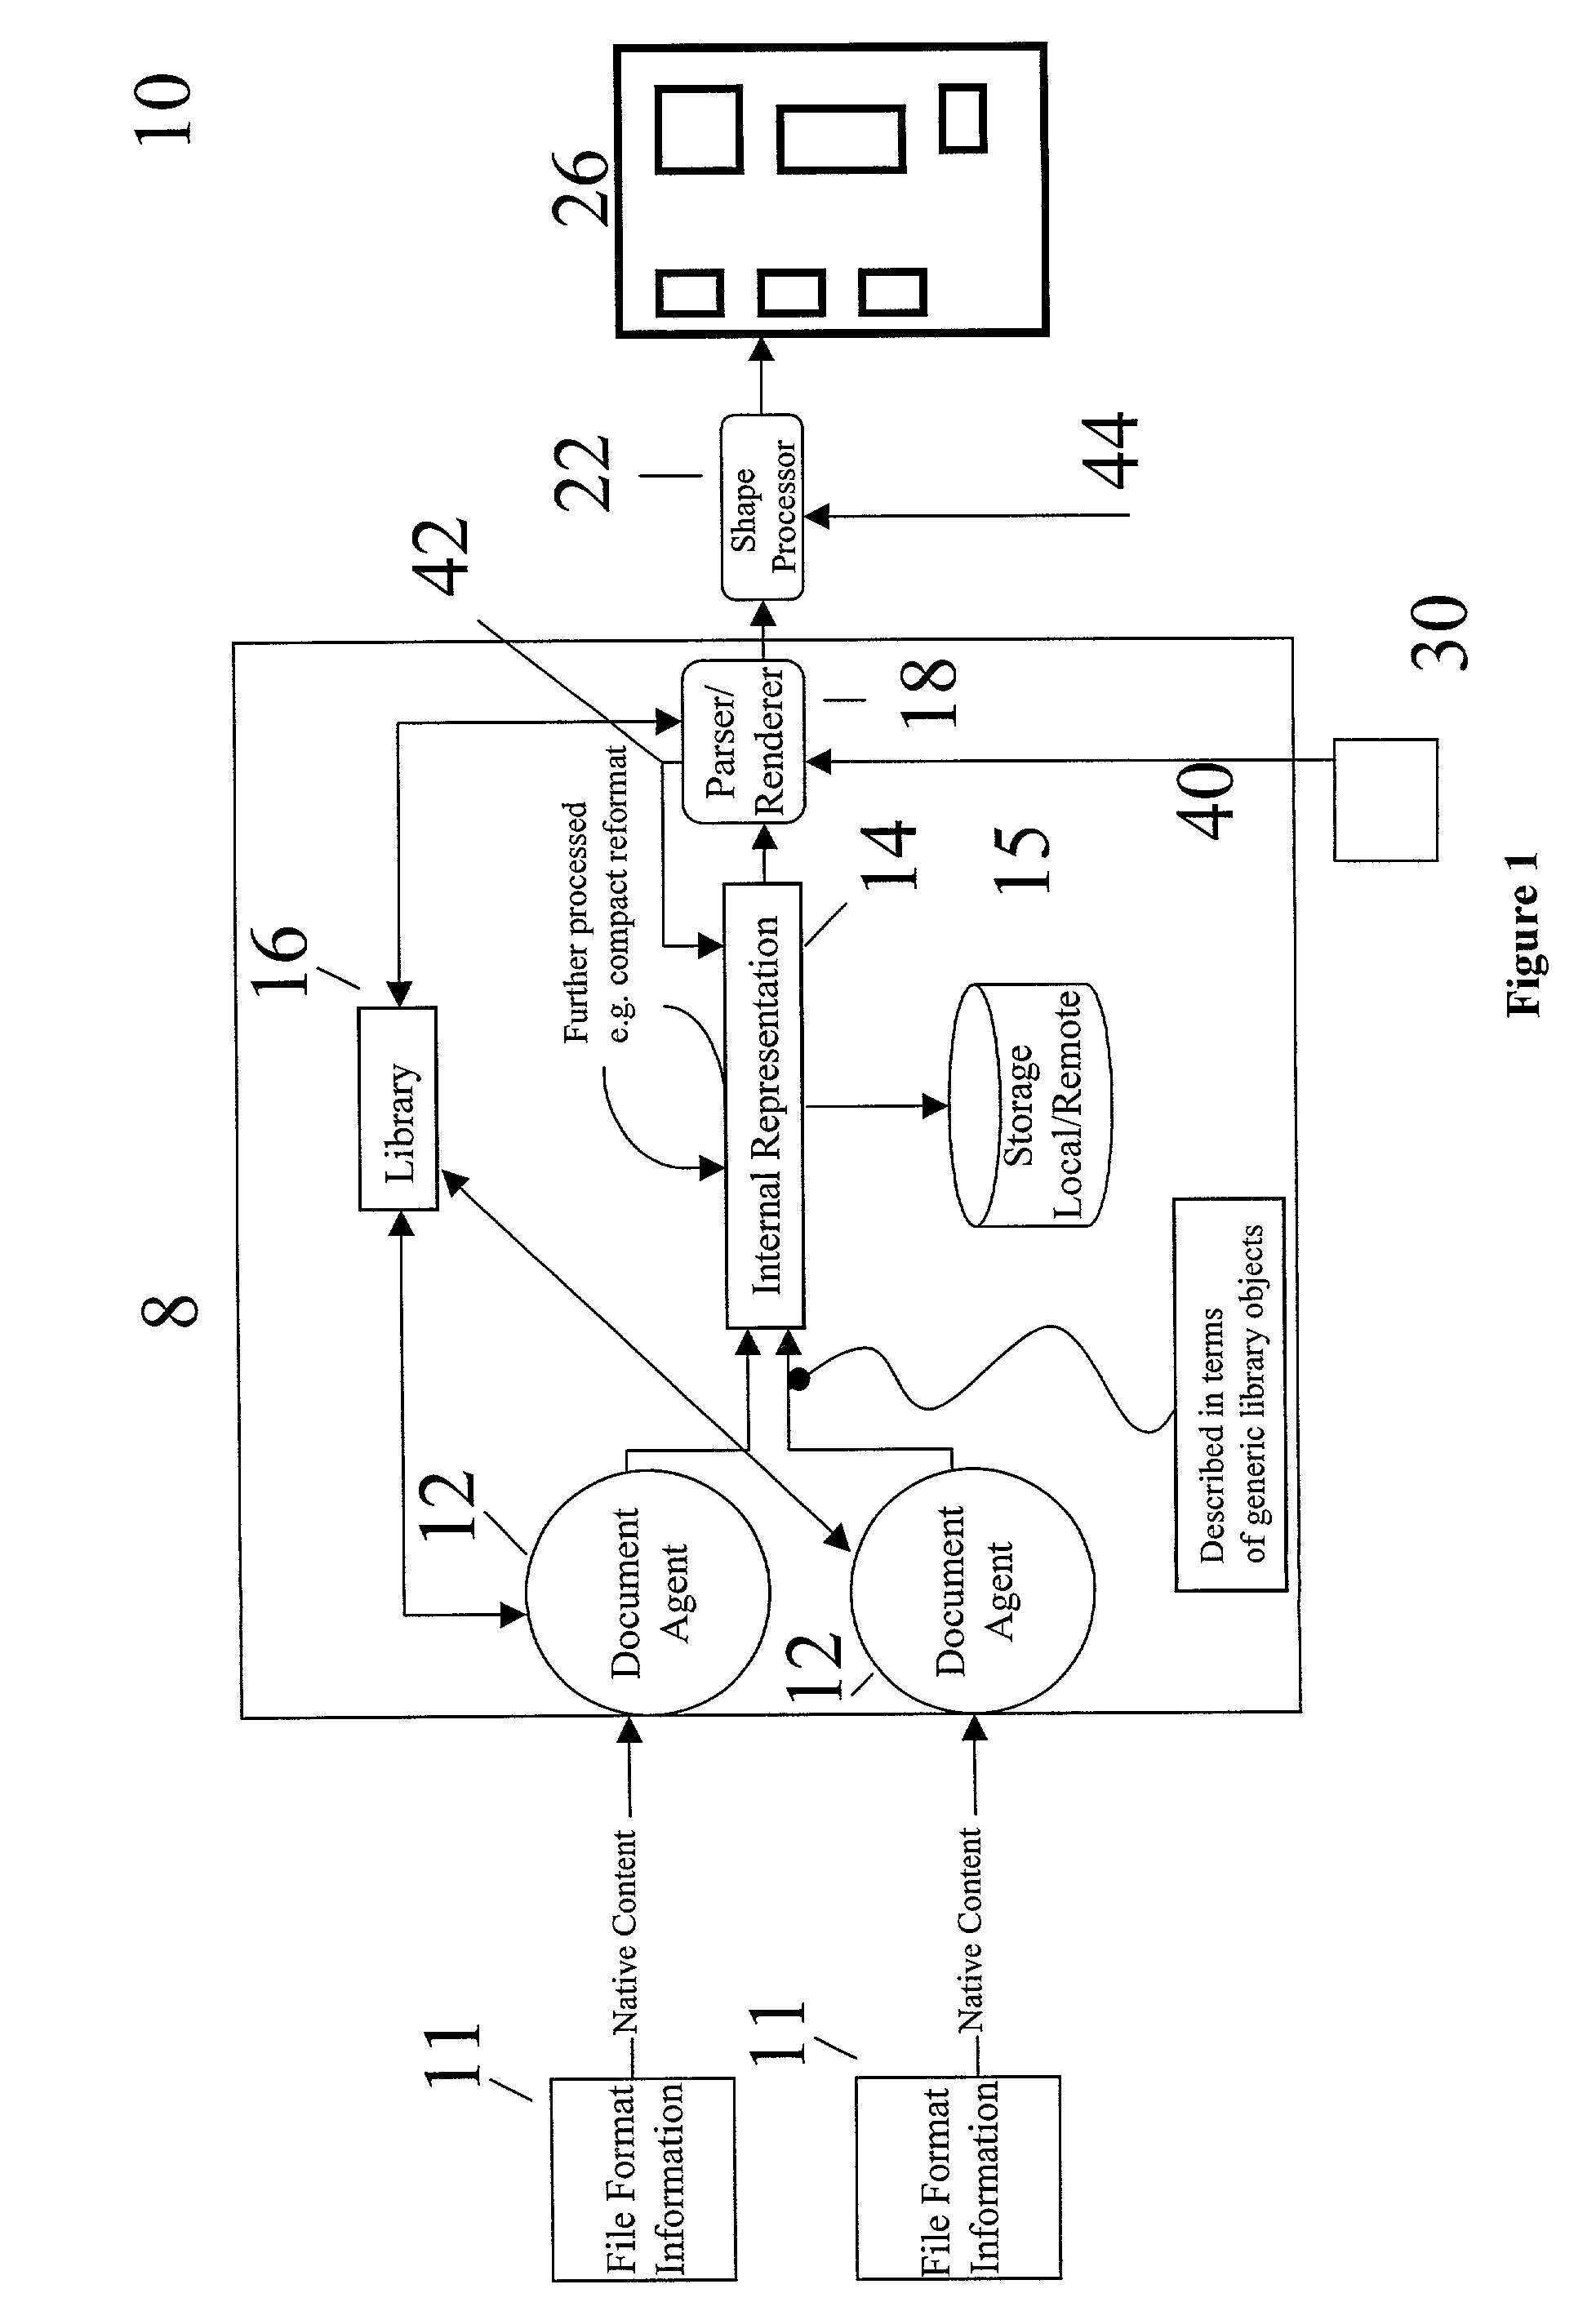 User interface systems and methods for manipulating and viewing digital documents